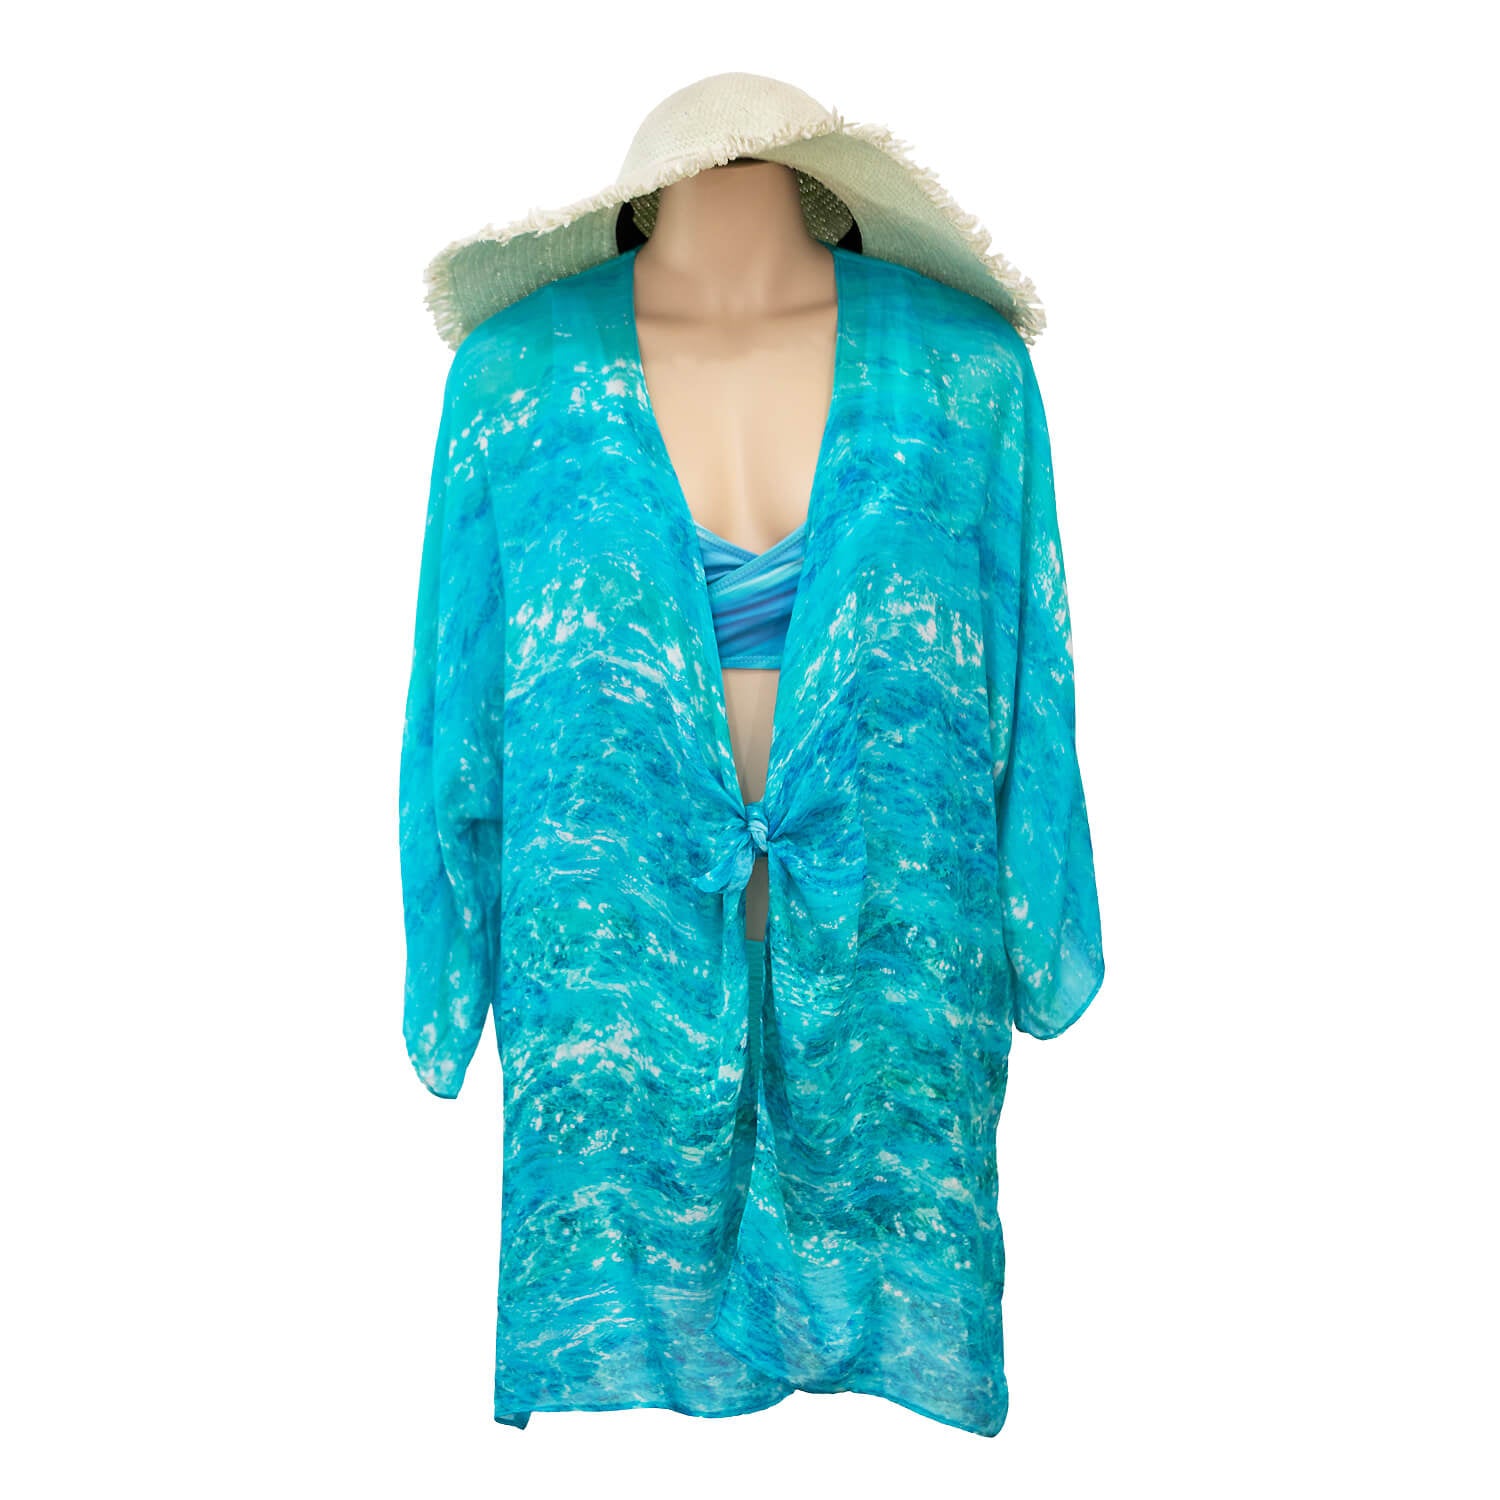 turquoise bay waterfall jacket coverup over bathers by seahorse silks